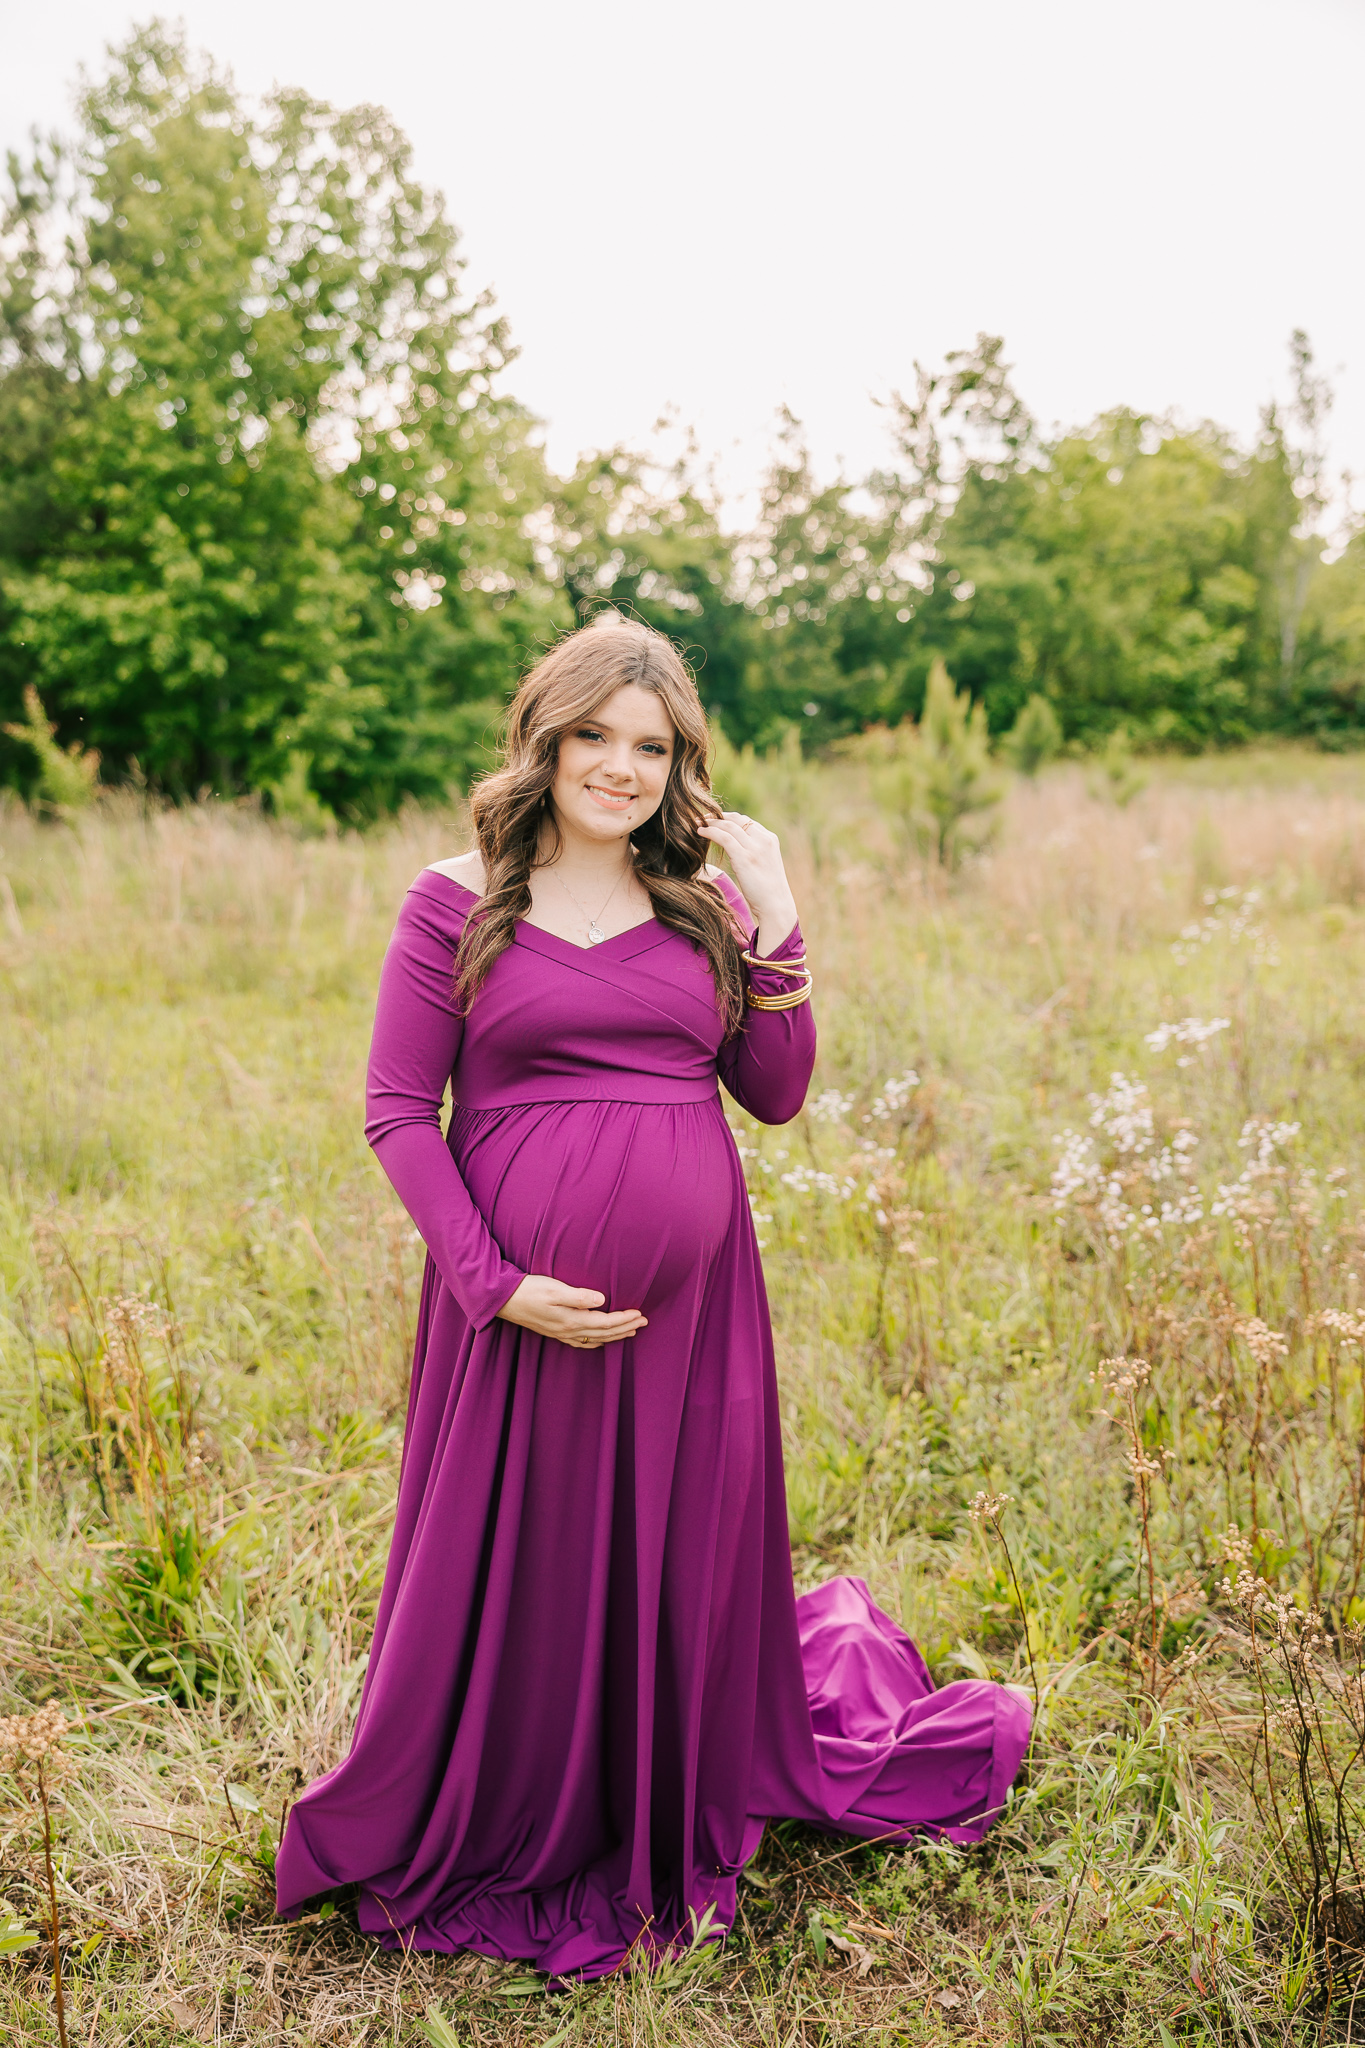 Pregnant mom walking through an open field for her maternity session with molly berry, your atlanta maternity photographer